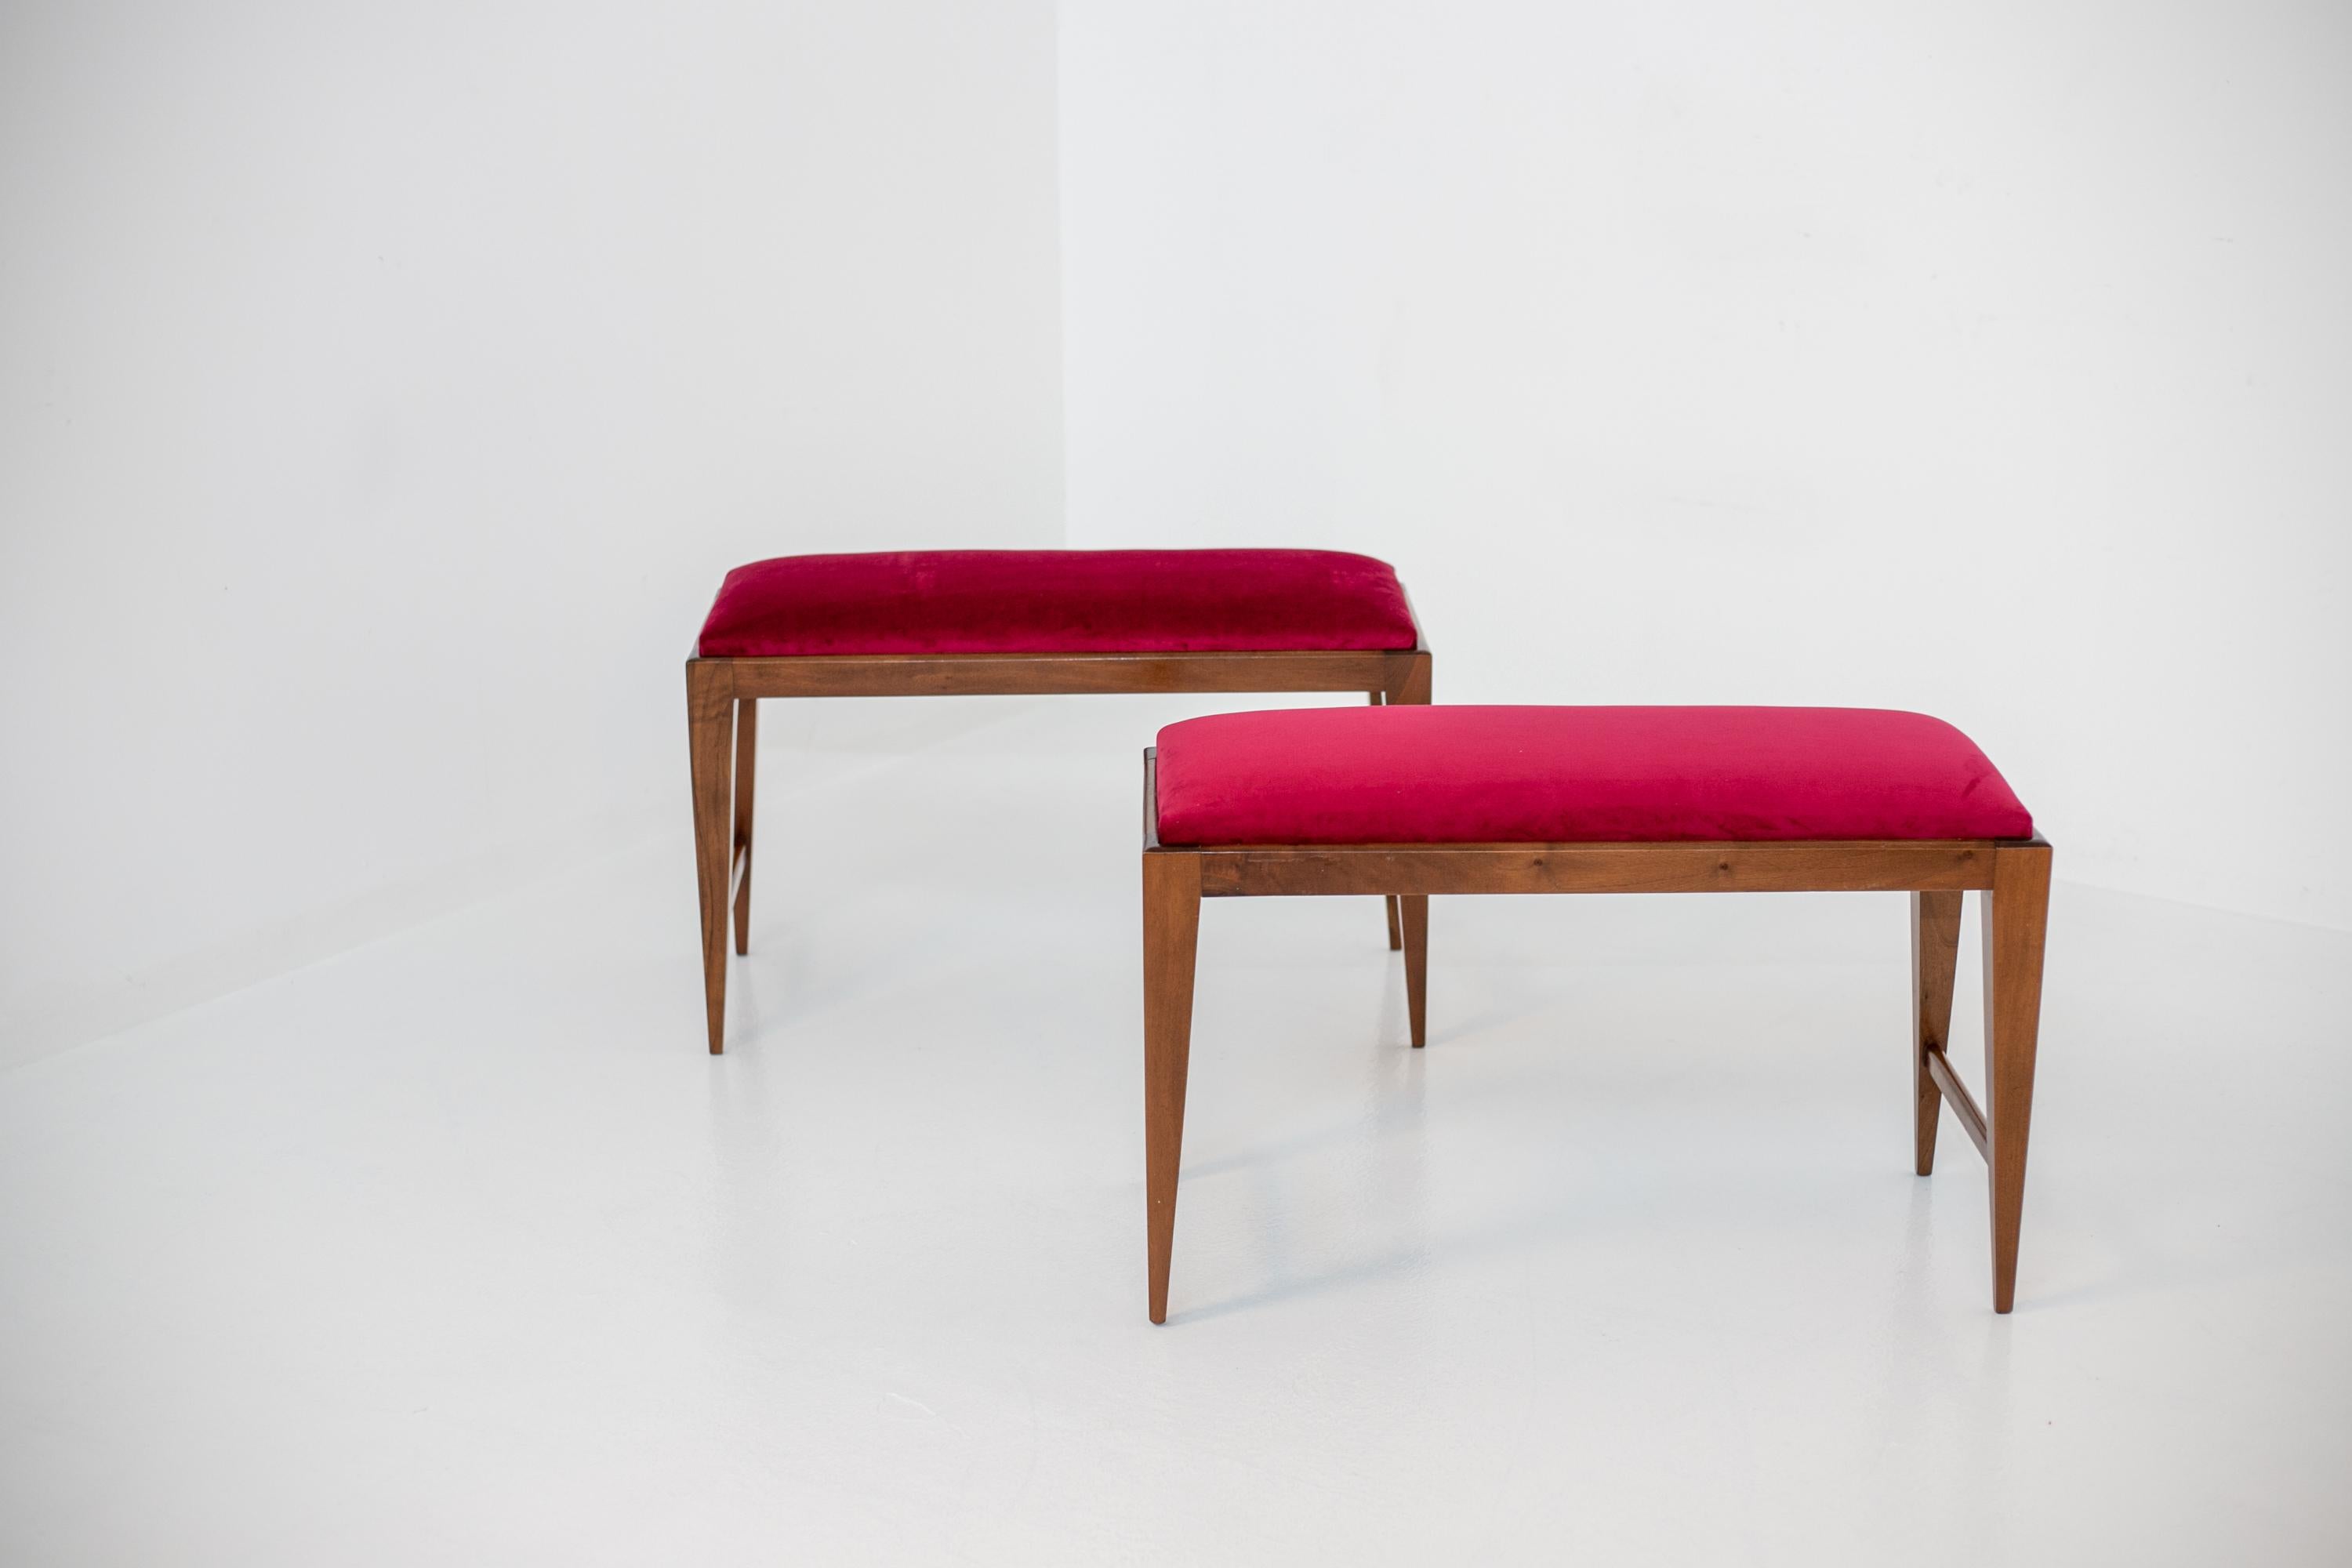 Elegant pair of restored 1950's Italian stools. The pair of benches have been restored in dark red velvet fabric. Beautiful wood shapes , in fact they almost recall the Pontian design with pyramidal wooden legs. The structure is made of walnut wood